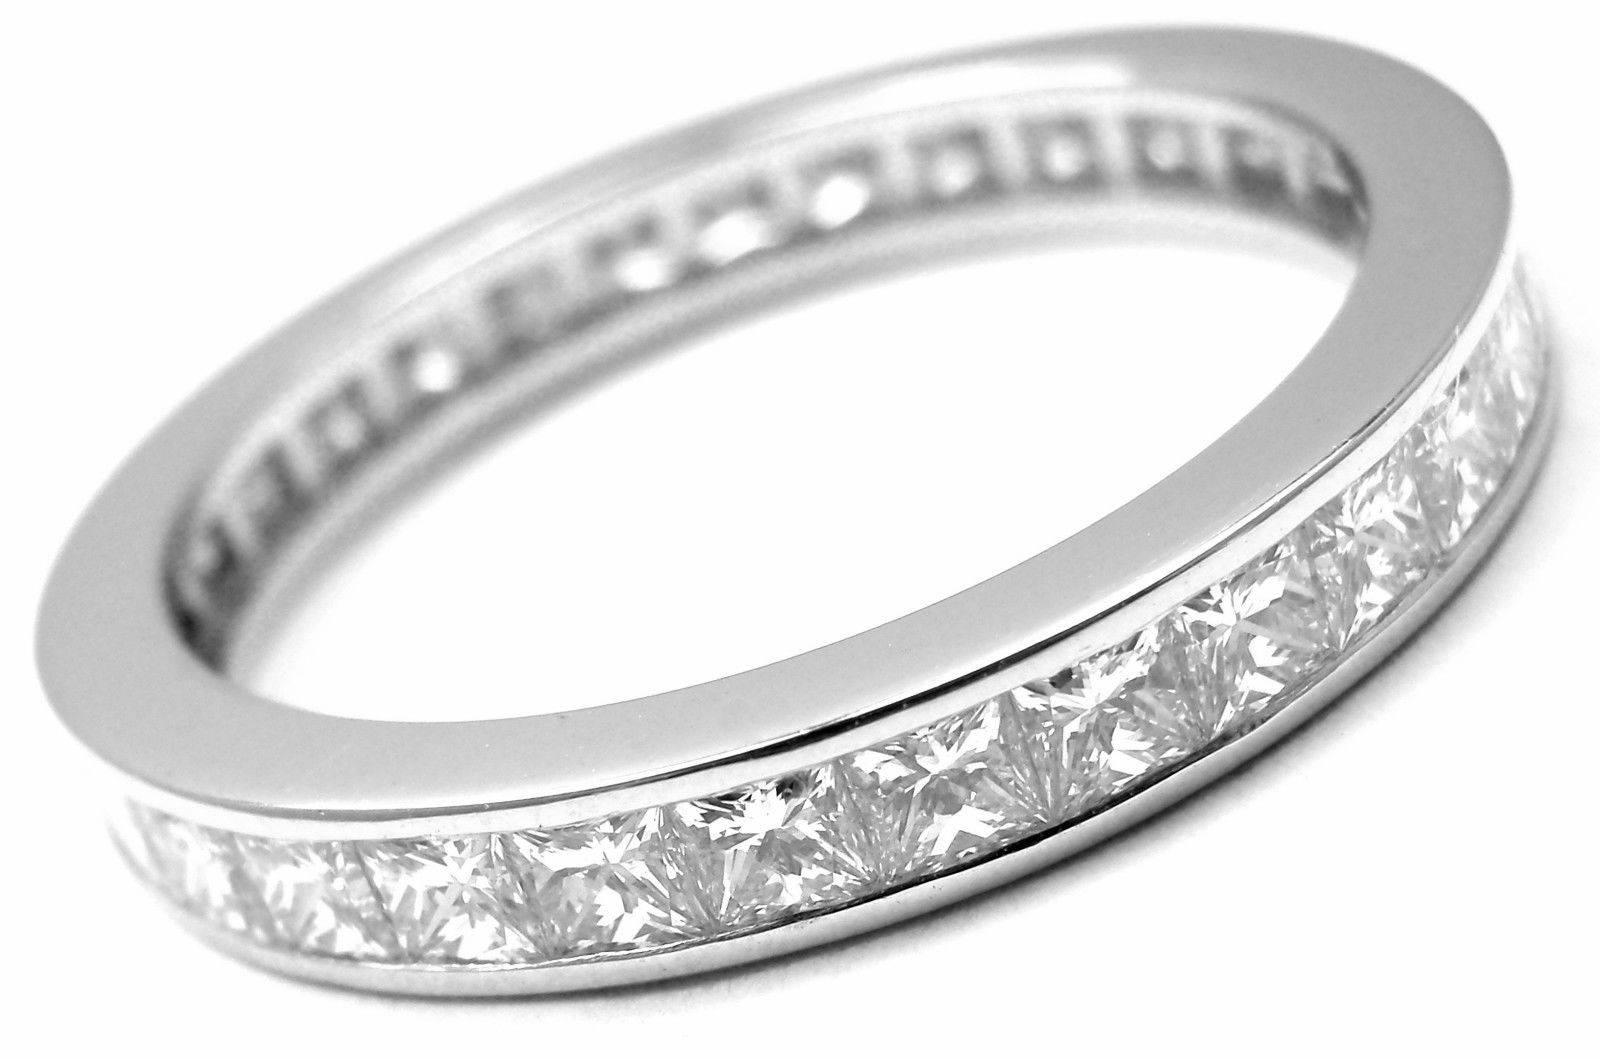 Platinum Princess Cut Diamond Eternity Band Ring by Cartier.
With Round brilliant cut diamonds VVS1 clarity, F color 
total weight approx. 1.72ct
This ring comes with original Cartier box.

Details:
Ring Size: European 53 US 6 1/4
Weight: 3.8